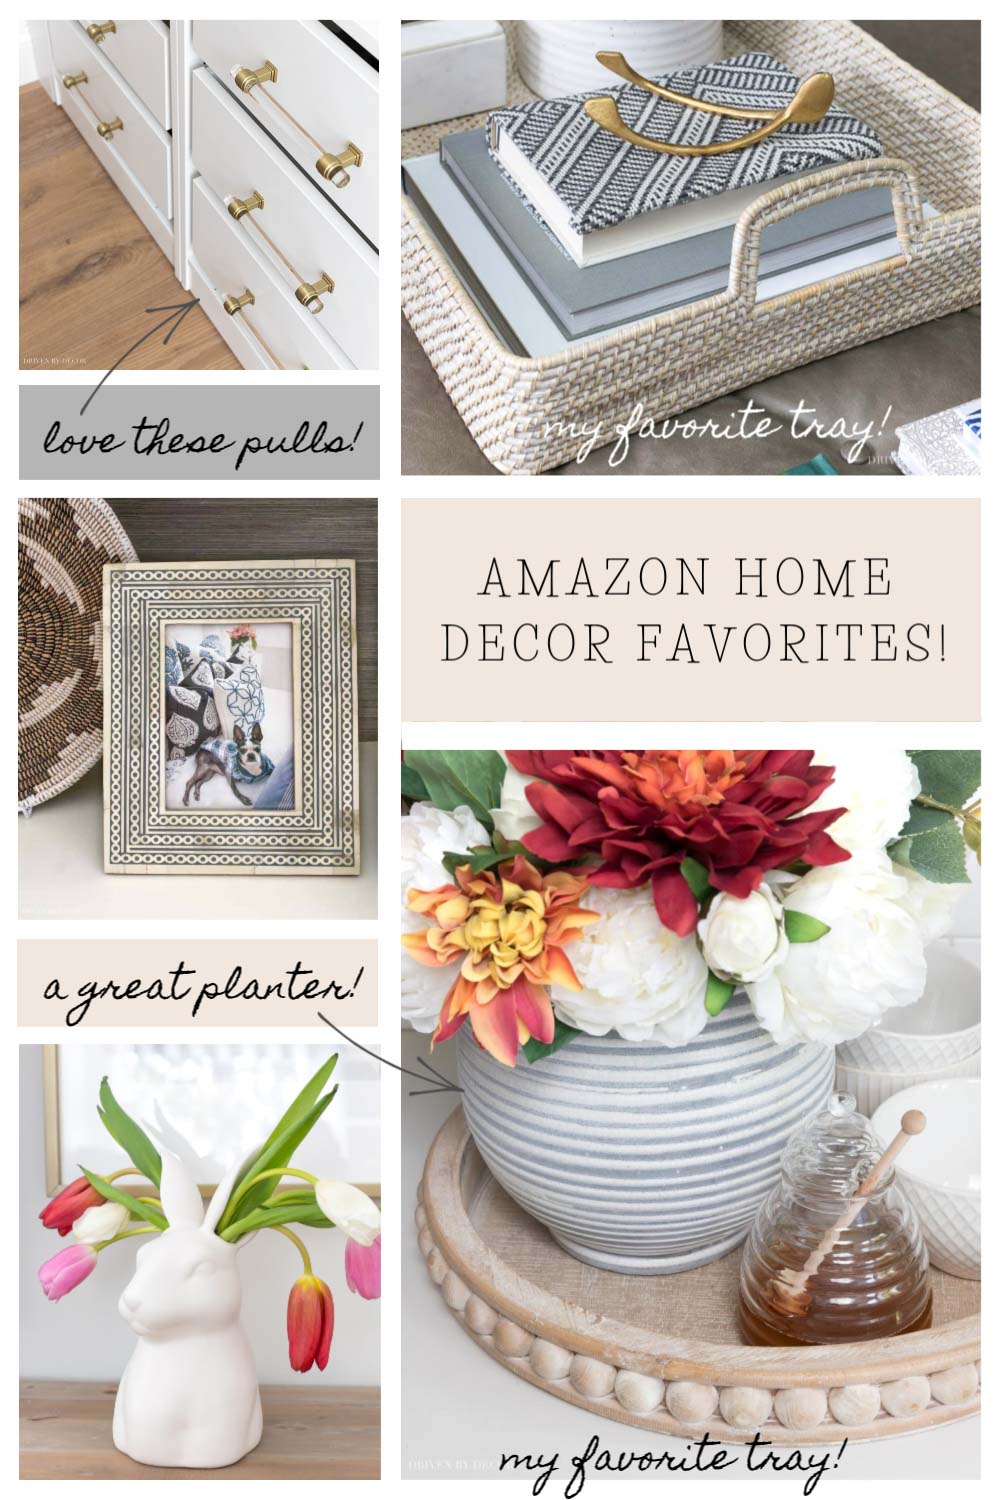 Loving all of these Amazon home decor finds - so many great things!!!